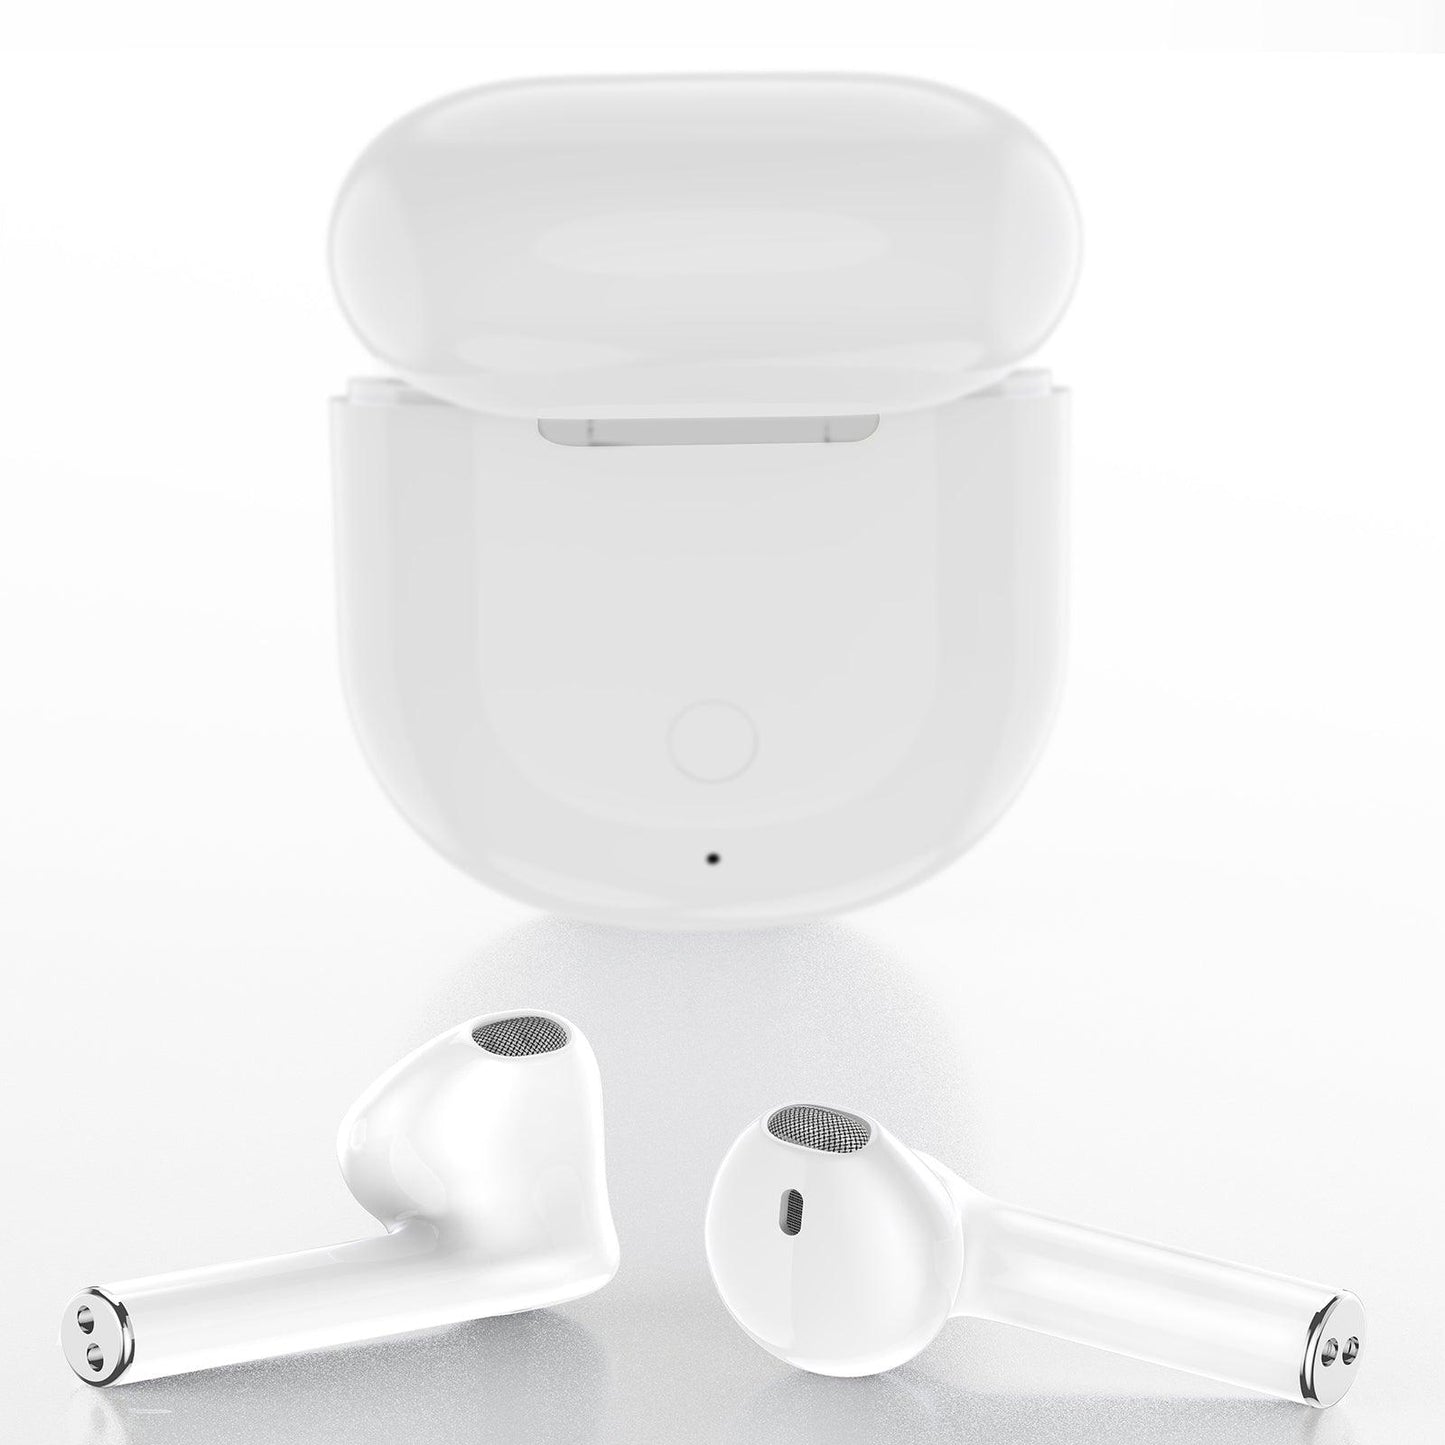 FitSmart Wireless Earbuds Earphones Bluetooth 5.0 For IOS Android In Built Mic - White